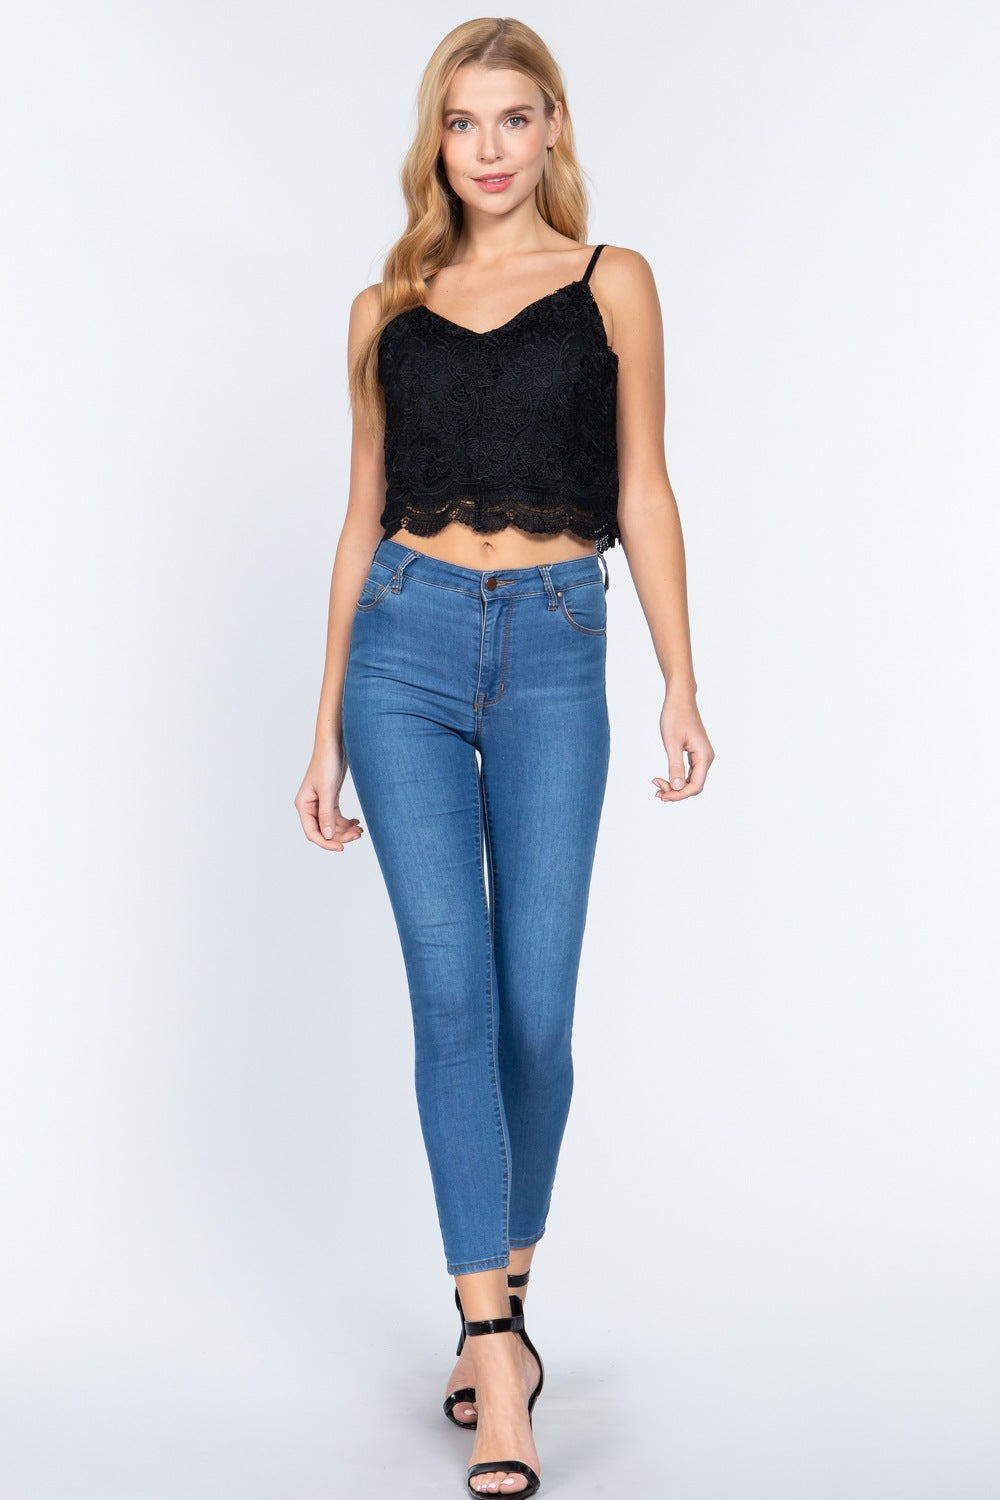 Crochet Lace Cami Woven Top - LOLA LUXE